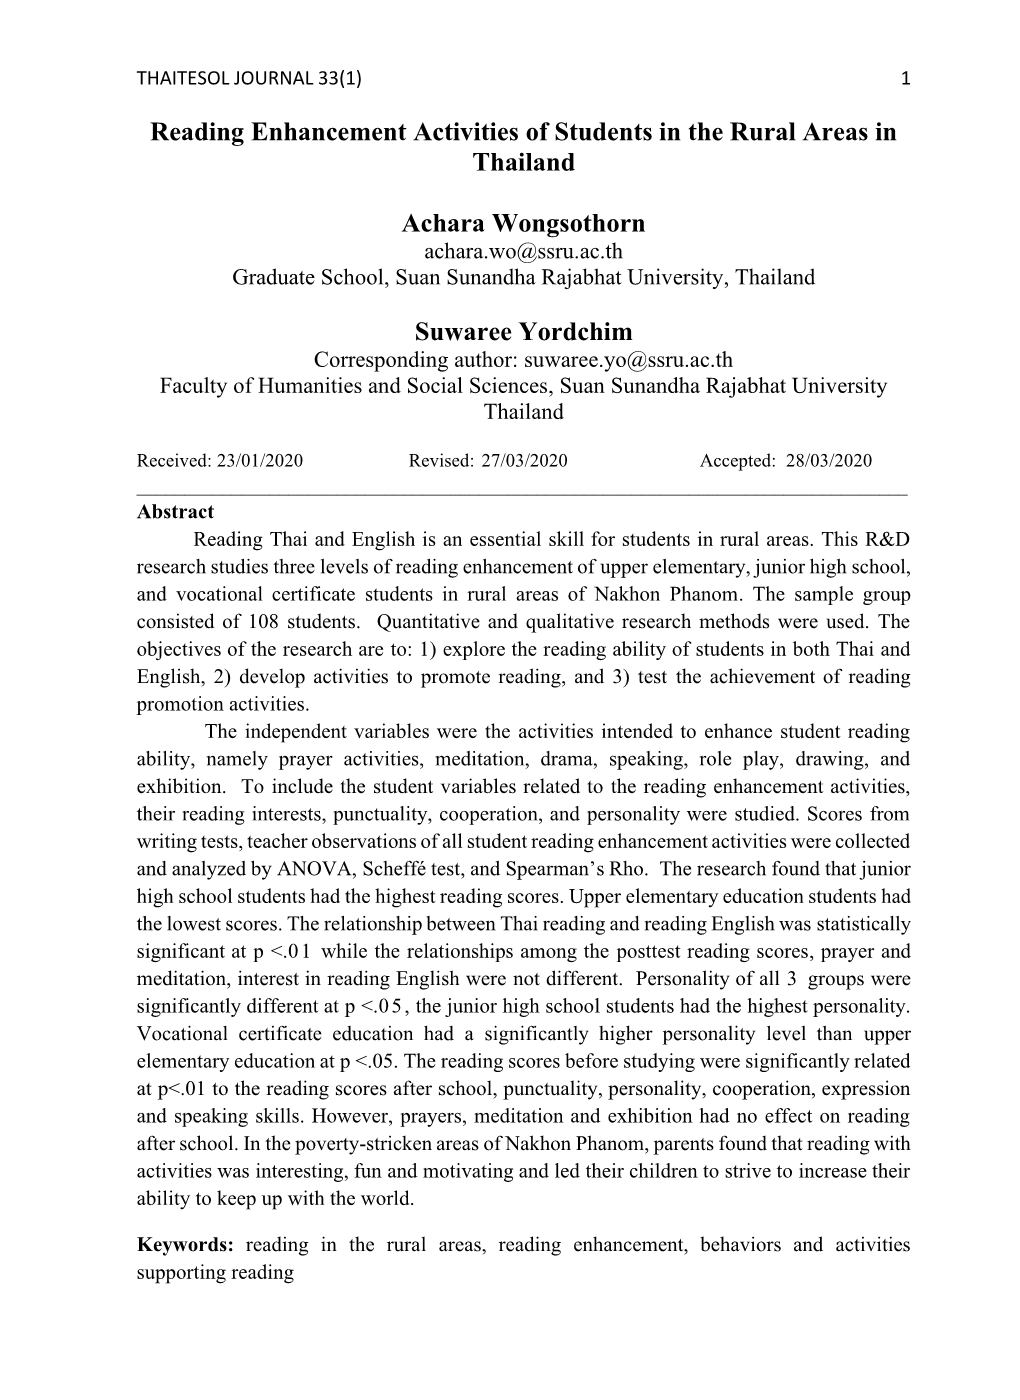 Reading Enhancement Activities of Students in the Rural Areas in Thailand